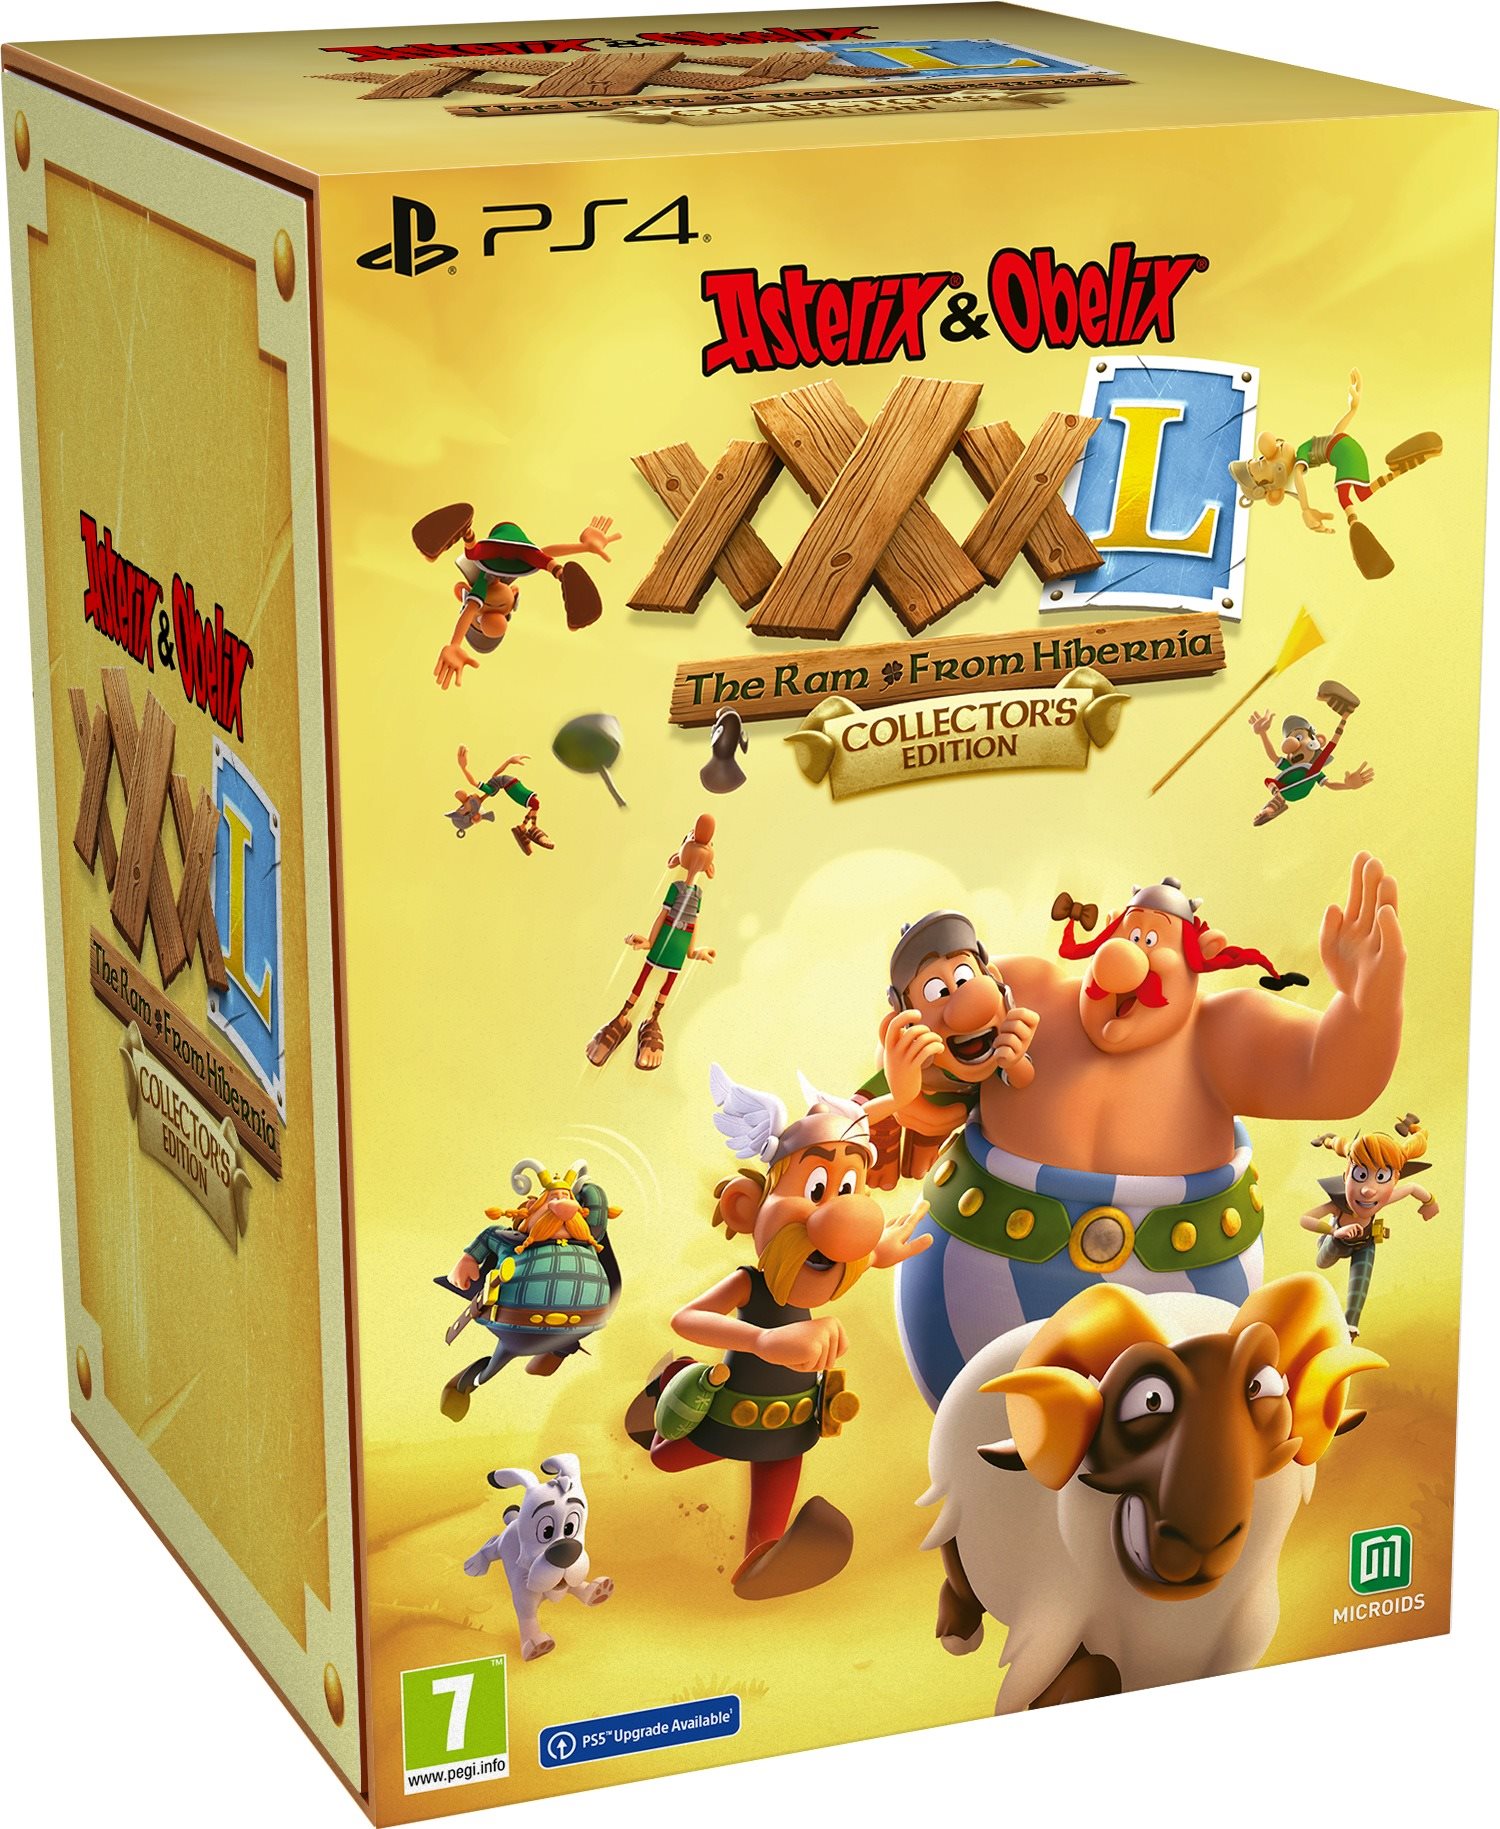 Asterix & Obelix XXXL: The Ram From Hibernia Collectors Edition Limited Edition - PS4